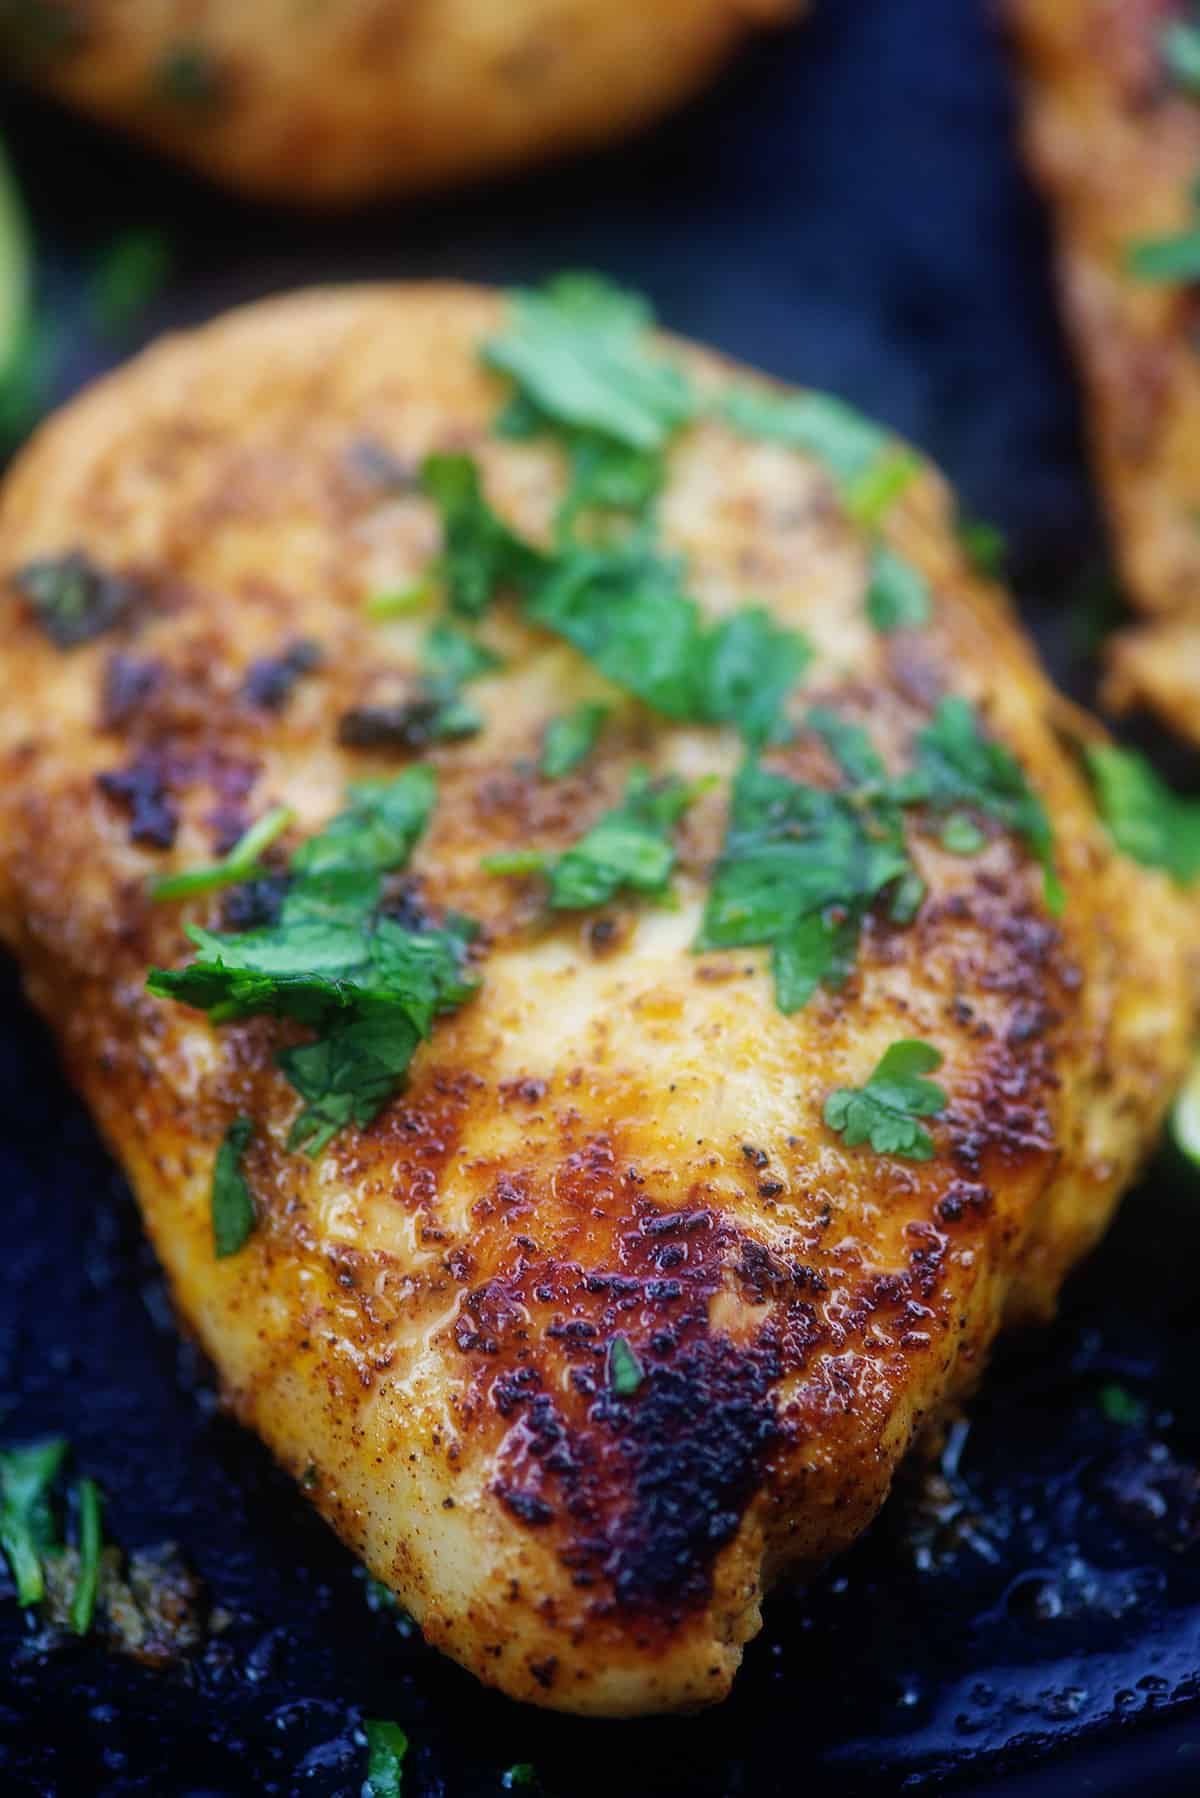 chili lime chicken breast in cast iron skillet.